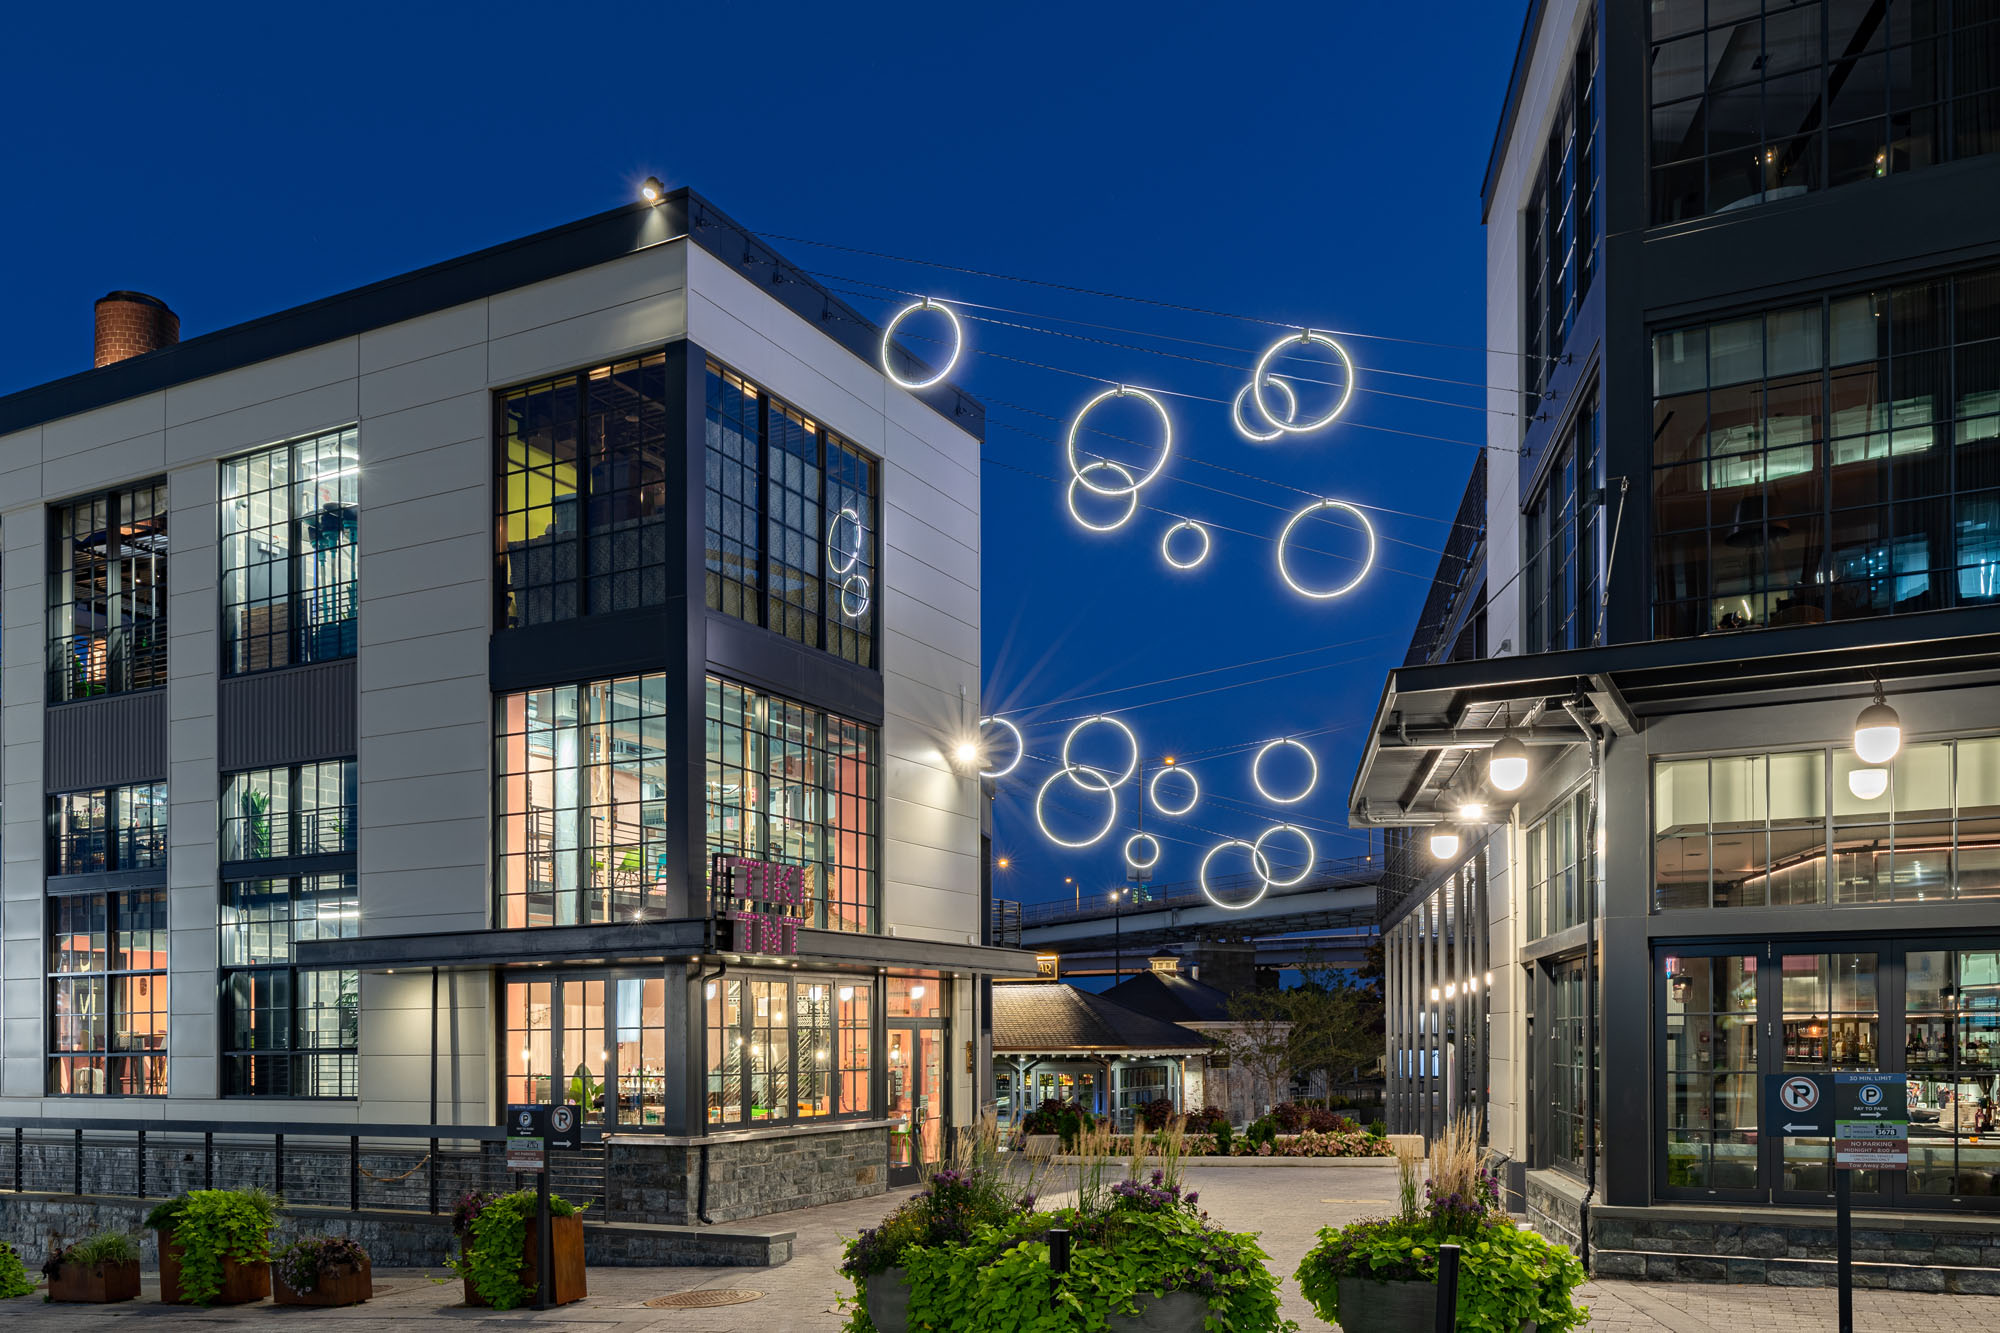 Case Study: The Wharf & Catenary Vertical Rings